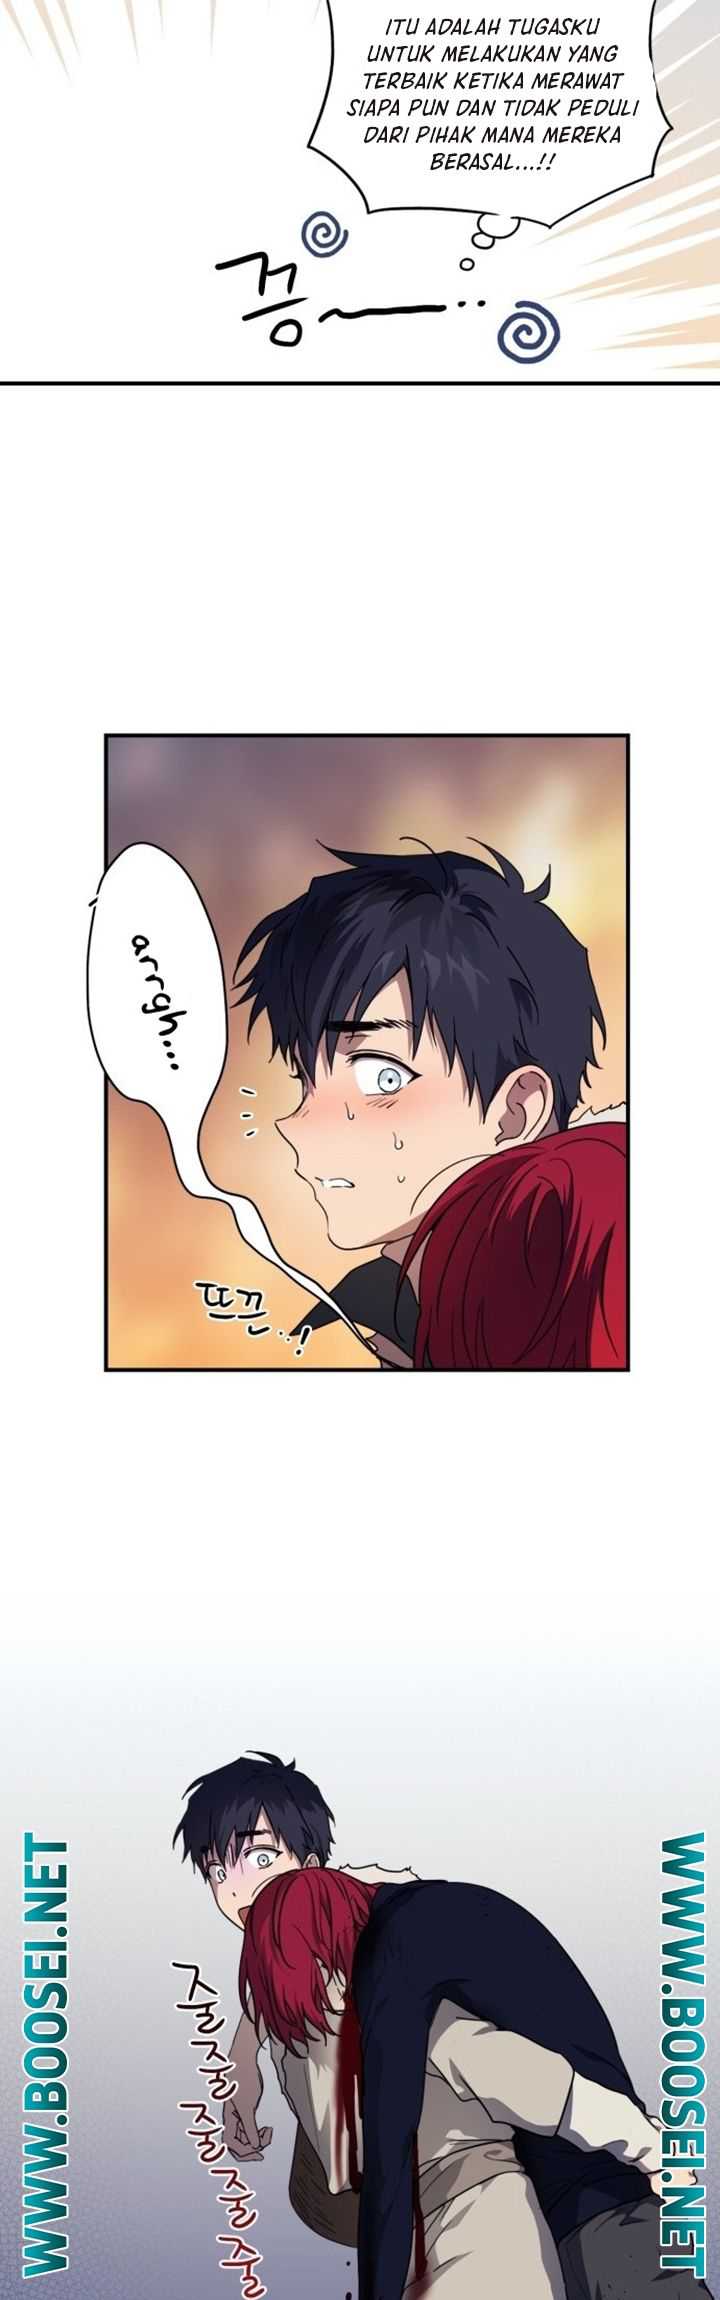 Blinded by the Setting Sun Chapter 105